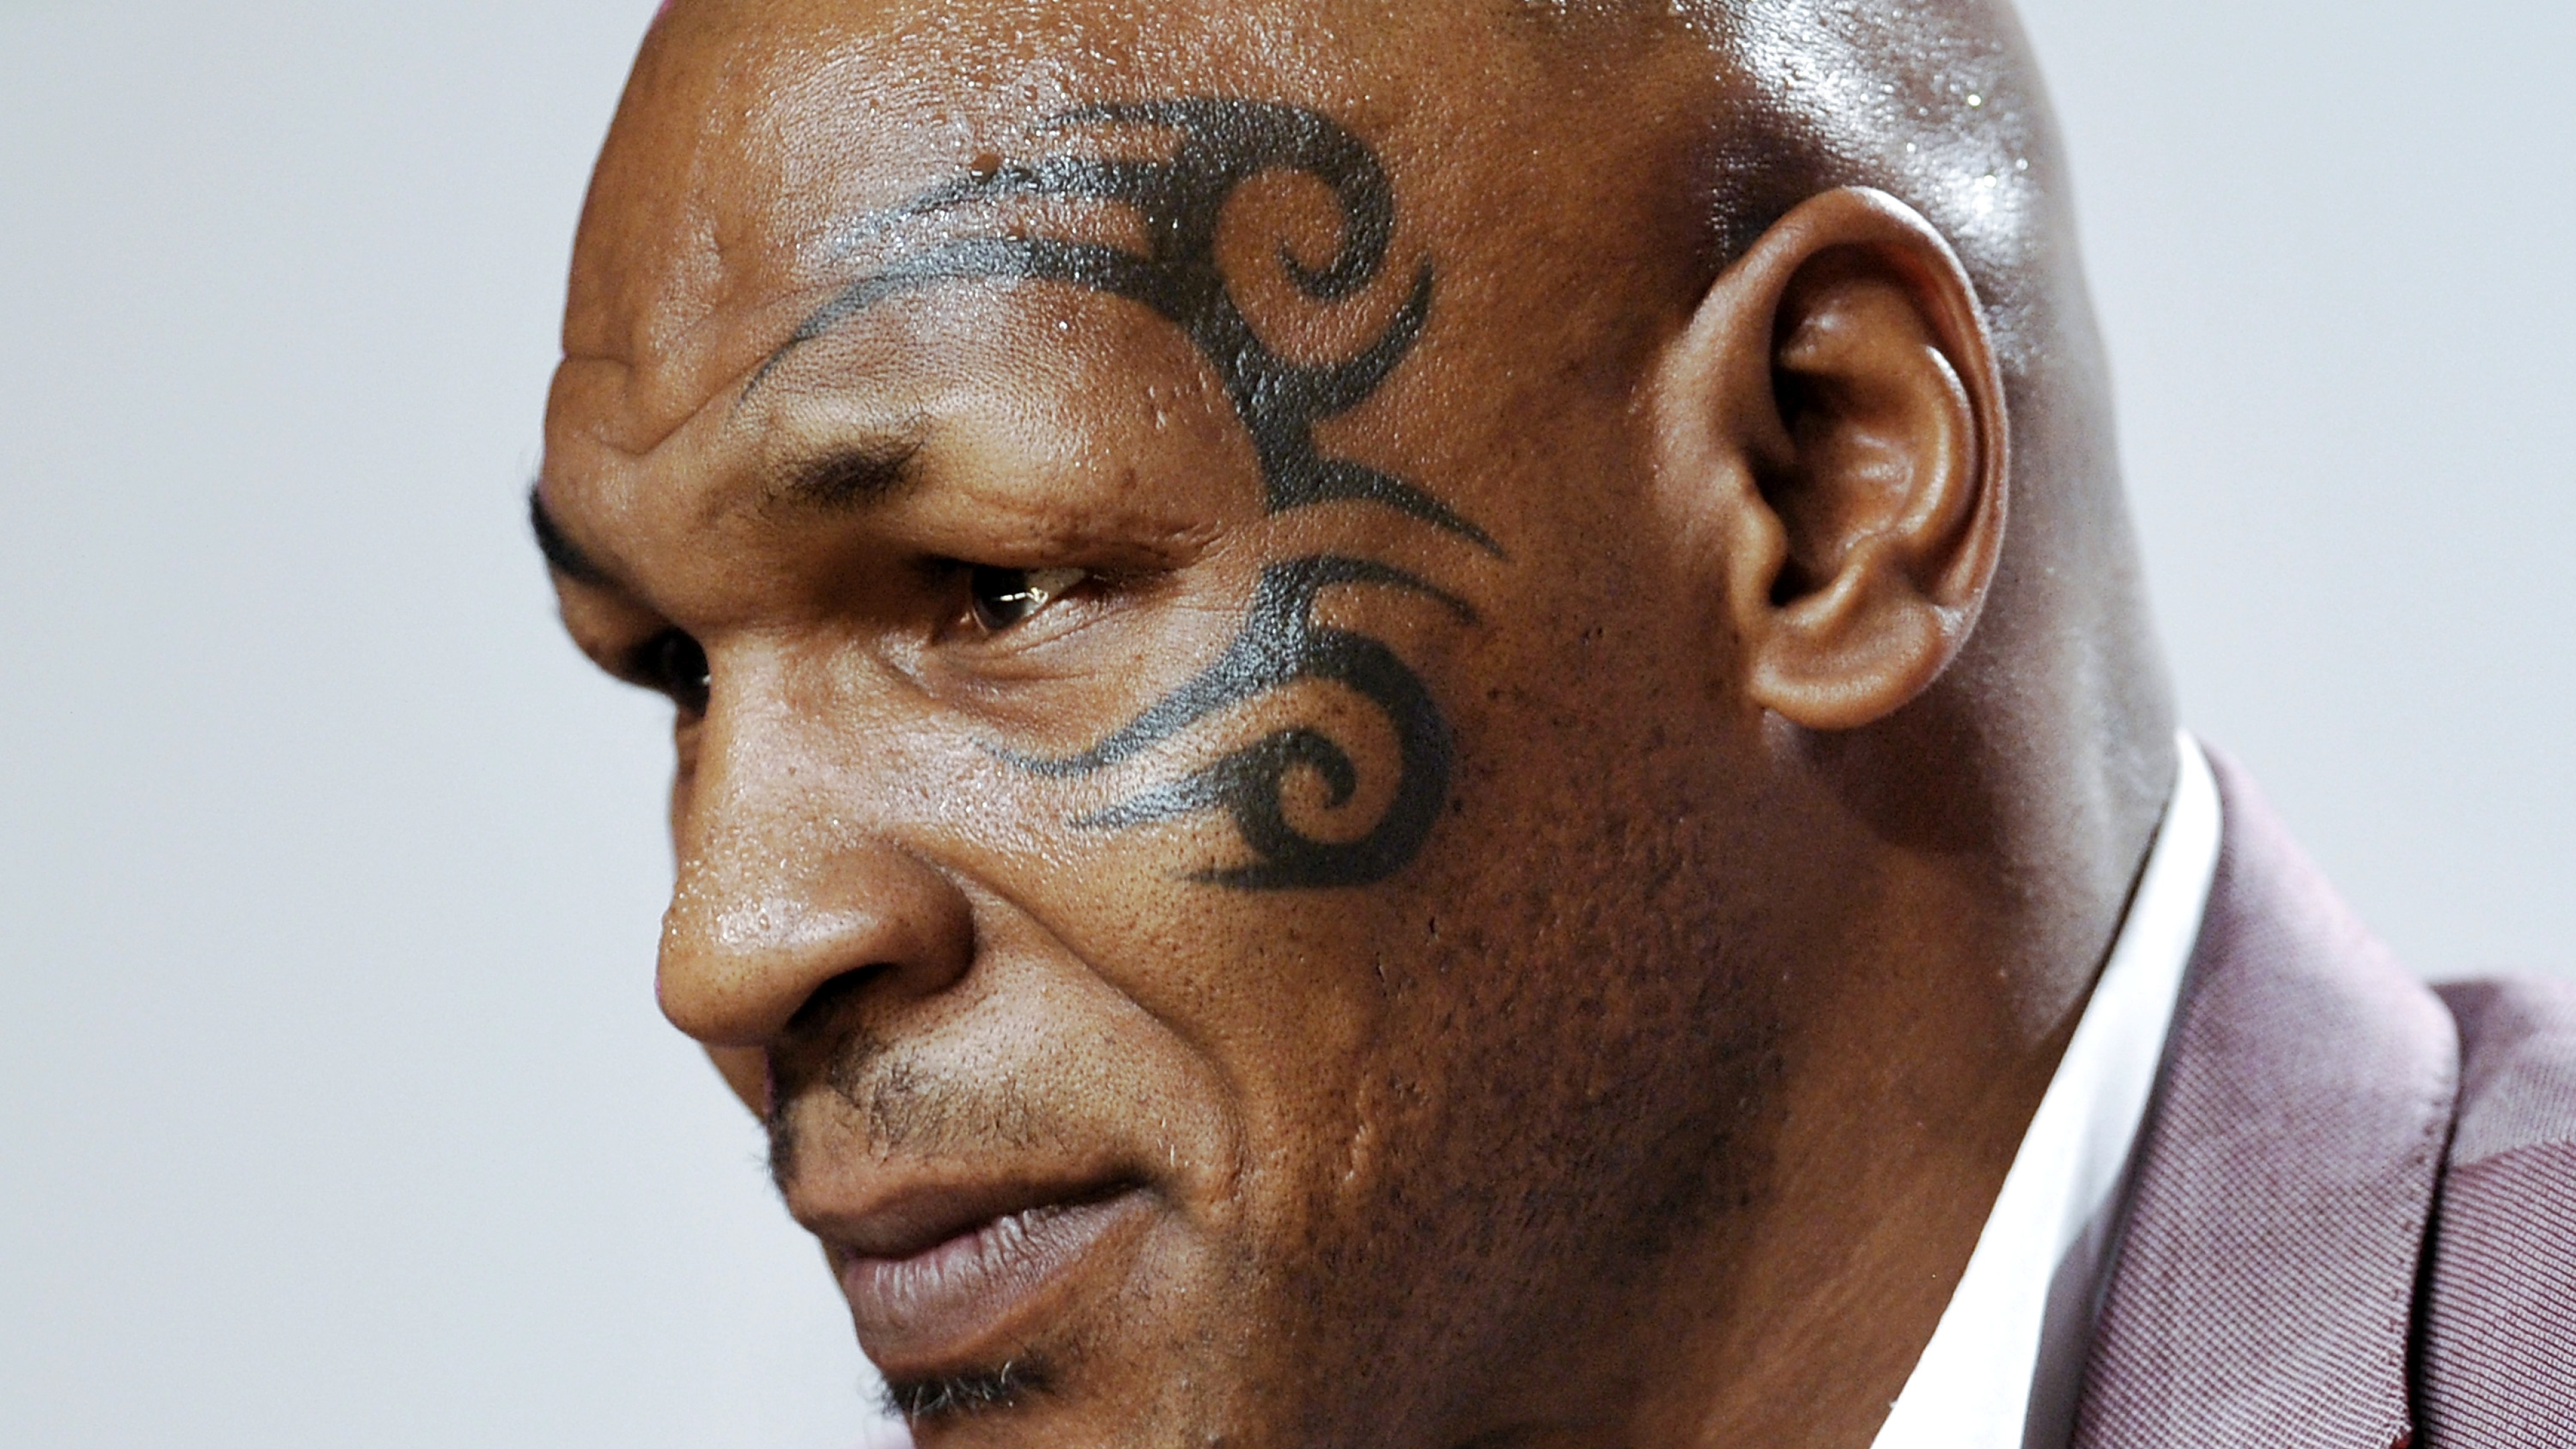 Mike Tyson Wallpapers and Backgrounds - WallpaperCG